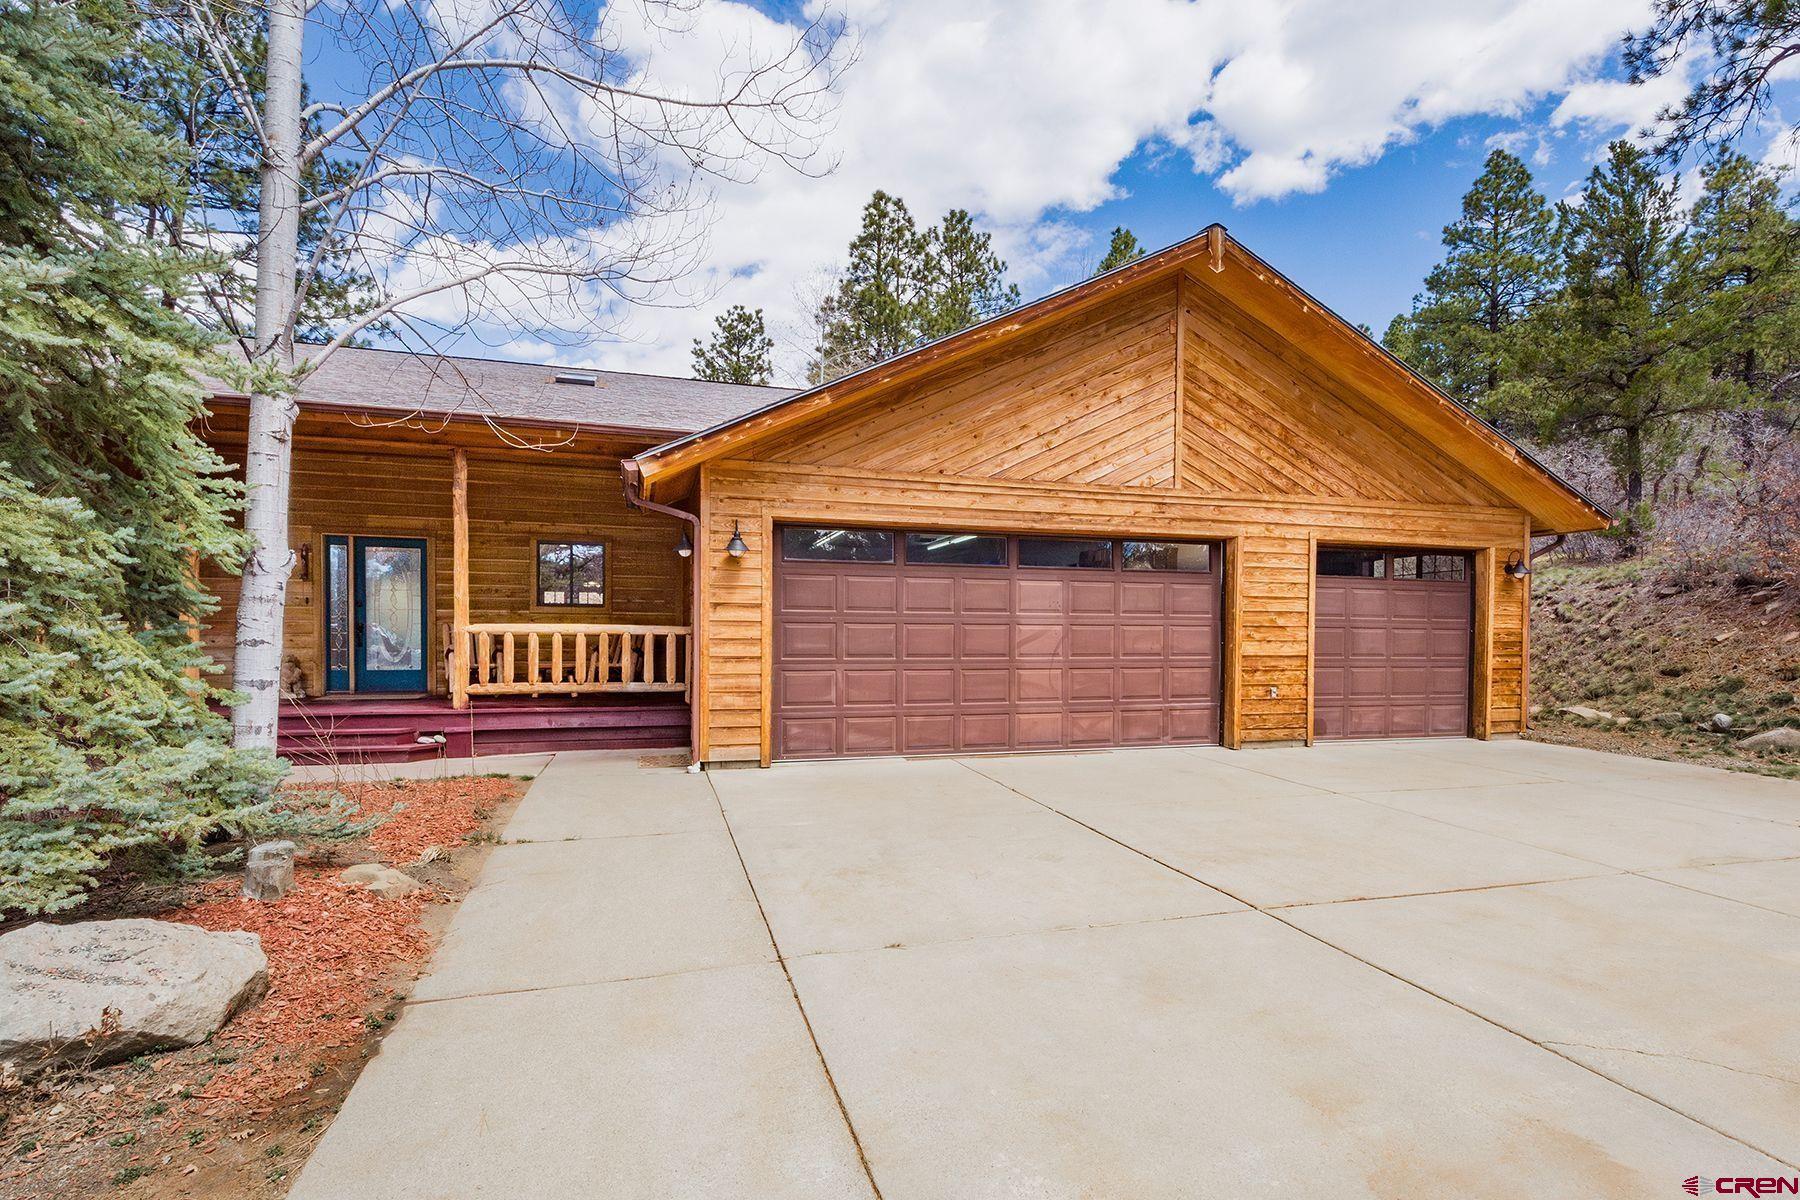 Photo of 1030 Meadow Rd in Durango, CO